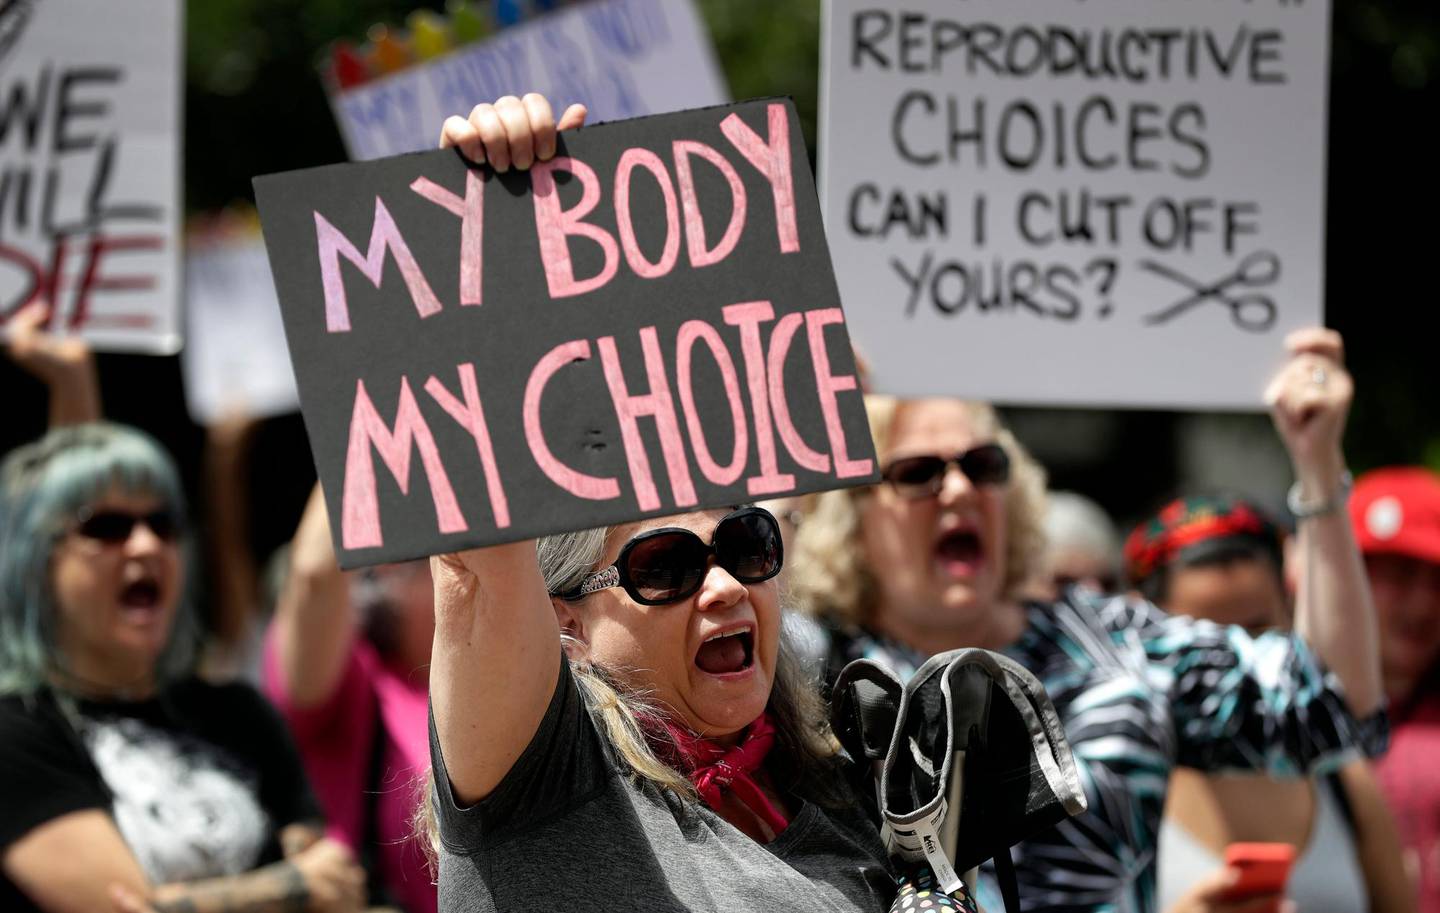 A group gathers to protest abortion restrictions at the State Capitol in Austin, Texas, Tuesday, May 21, 2019. (AP Photo/Eric Gay)